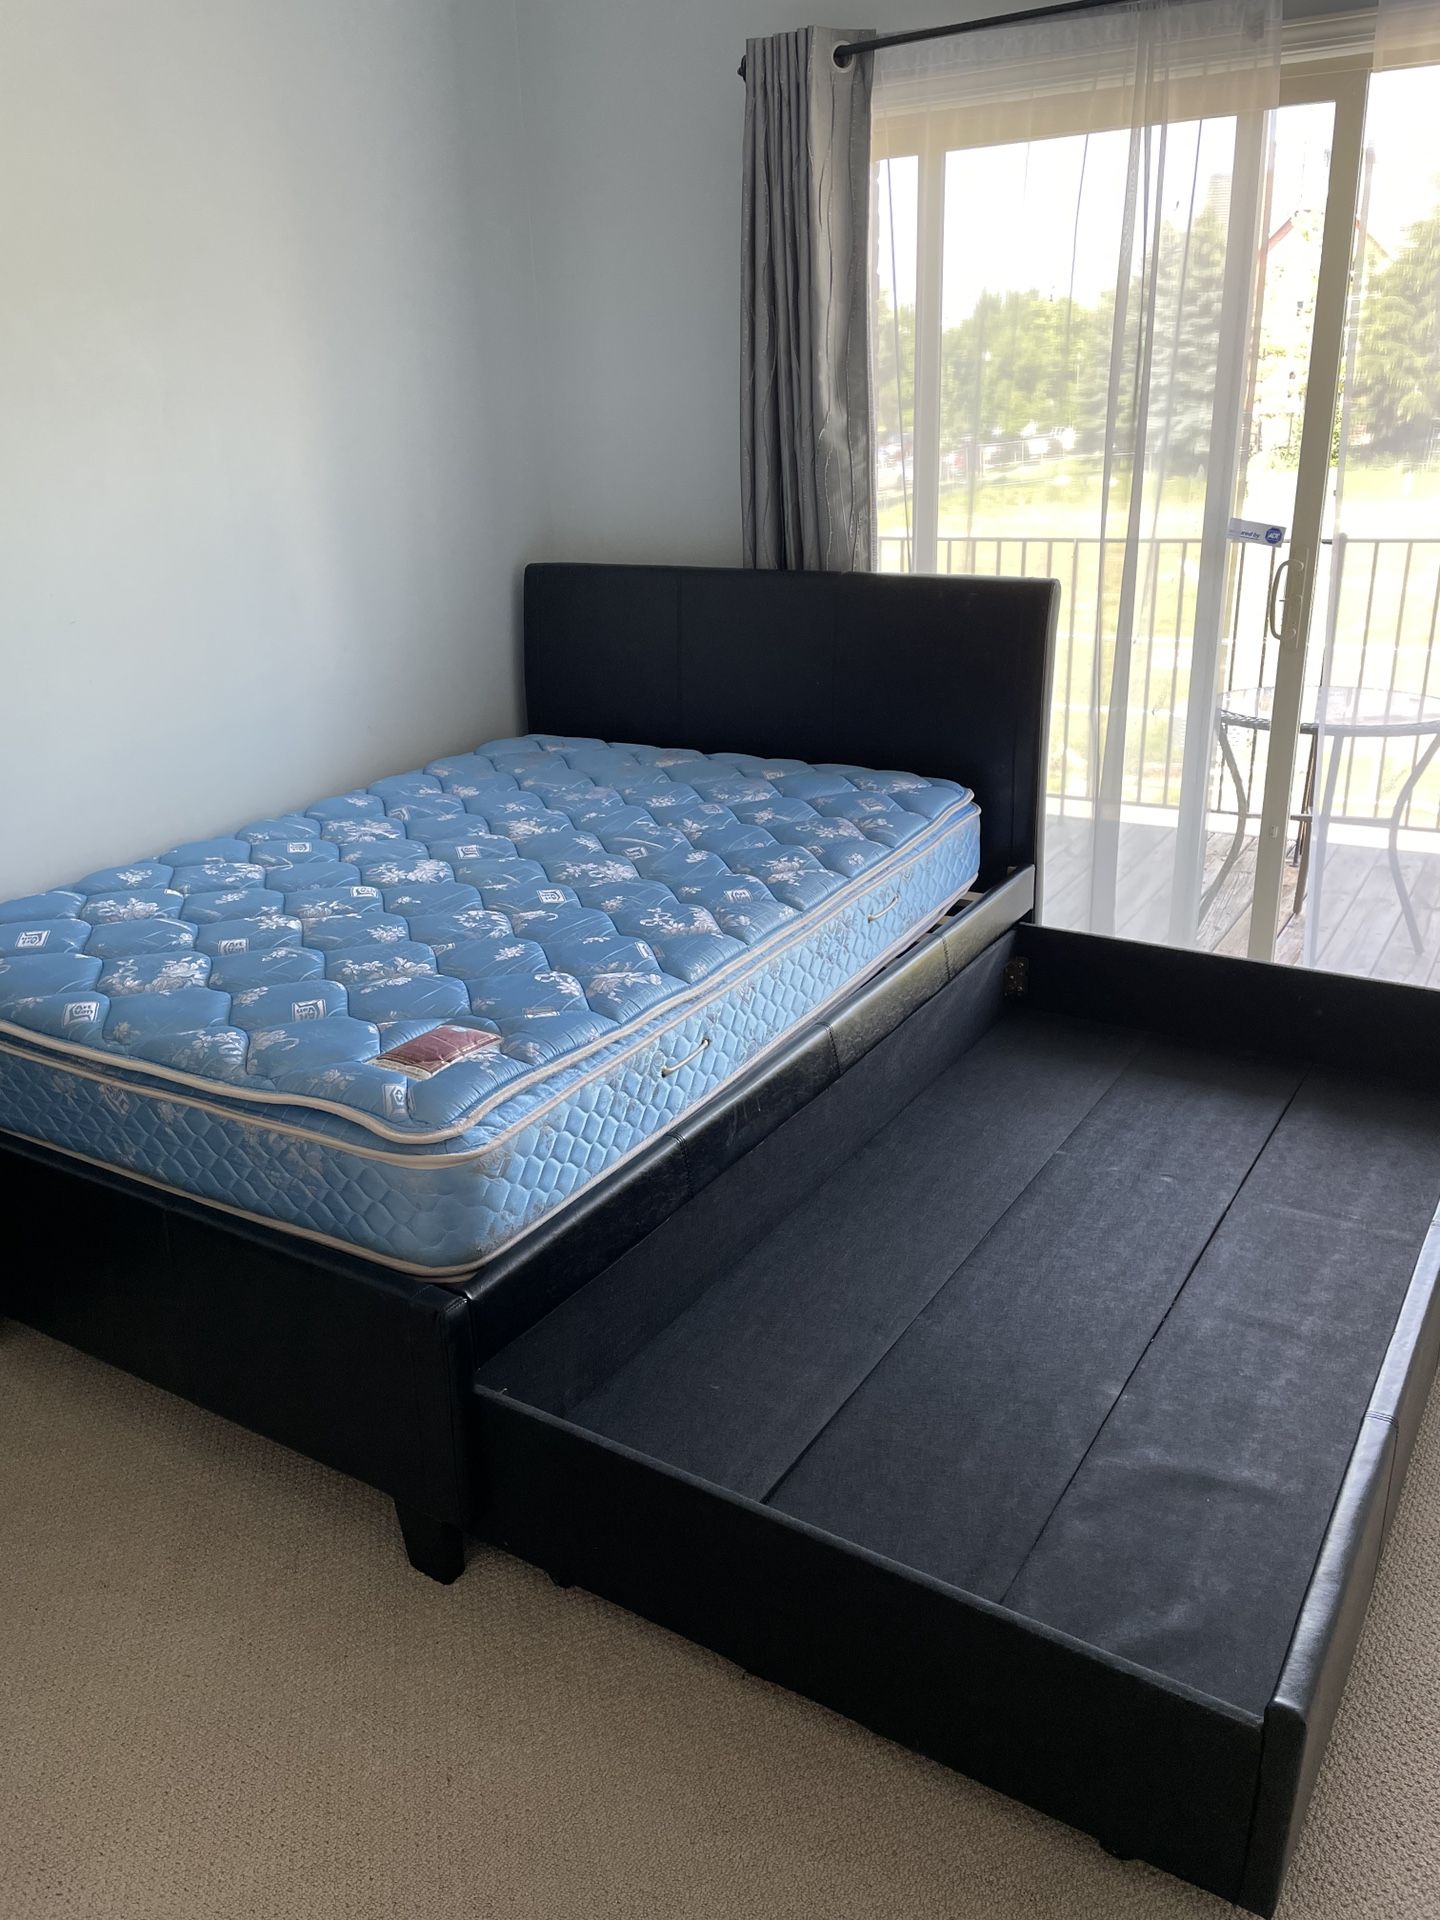 Like Or Love It 🥰 BED FRAME WITH PILLOW TOP MATTRESS 💕